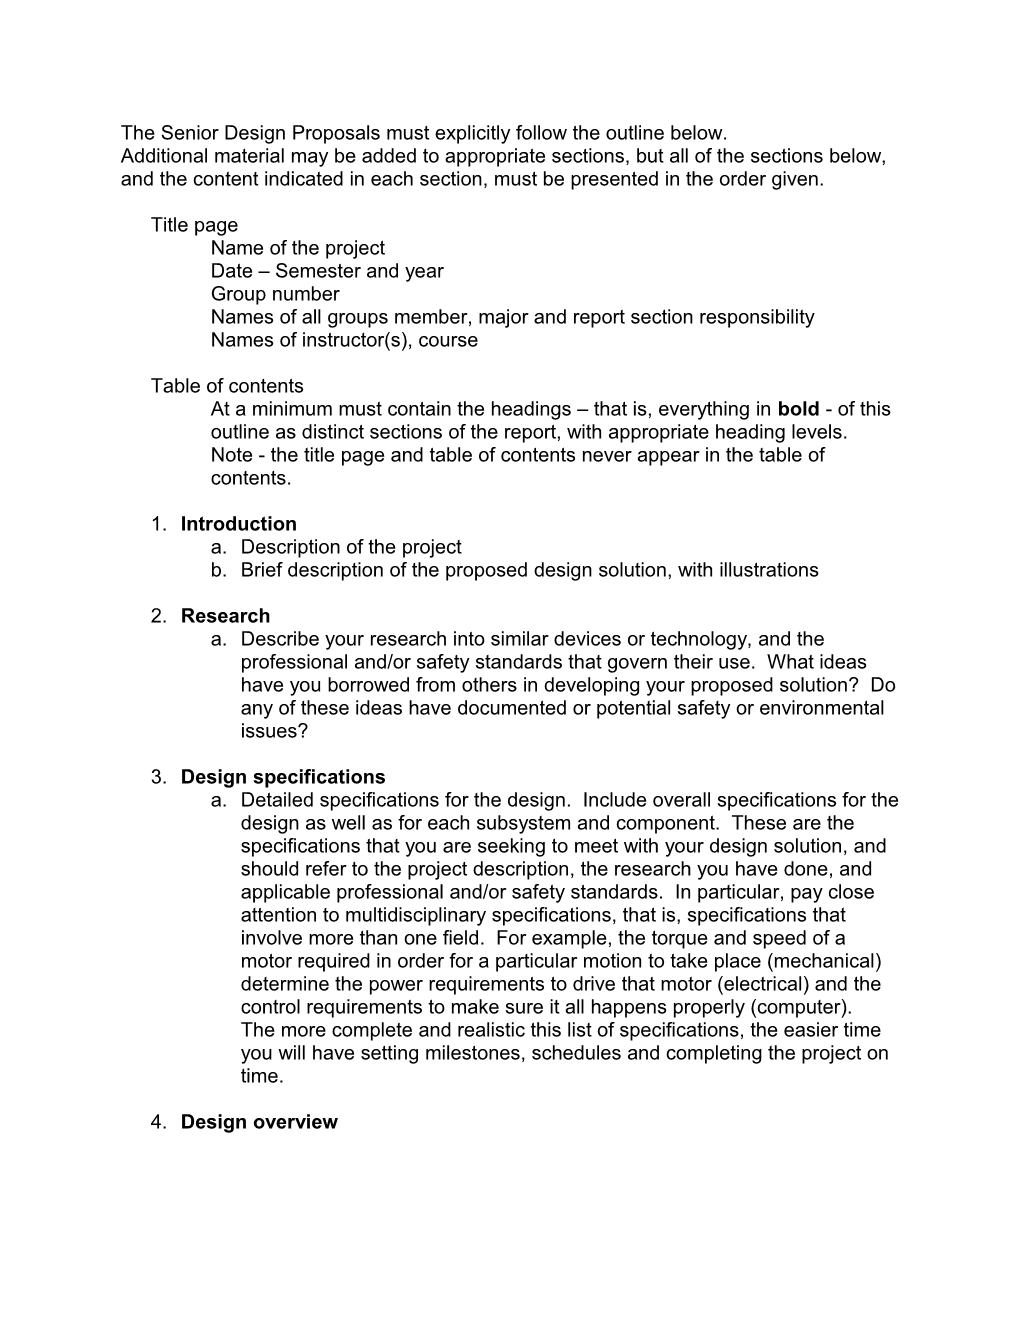 The Senior Design Proposals Must Explicitly Follow the Outline Below